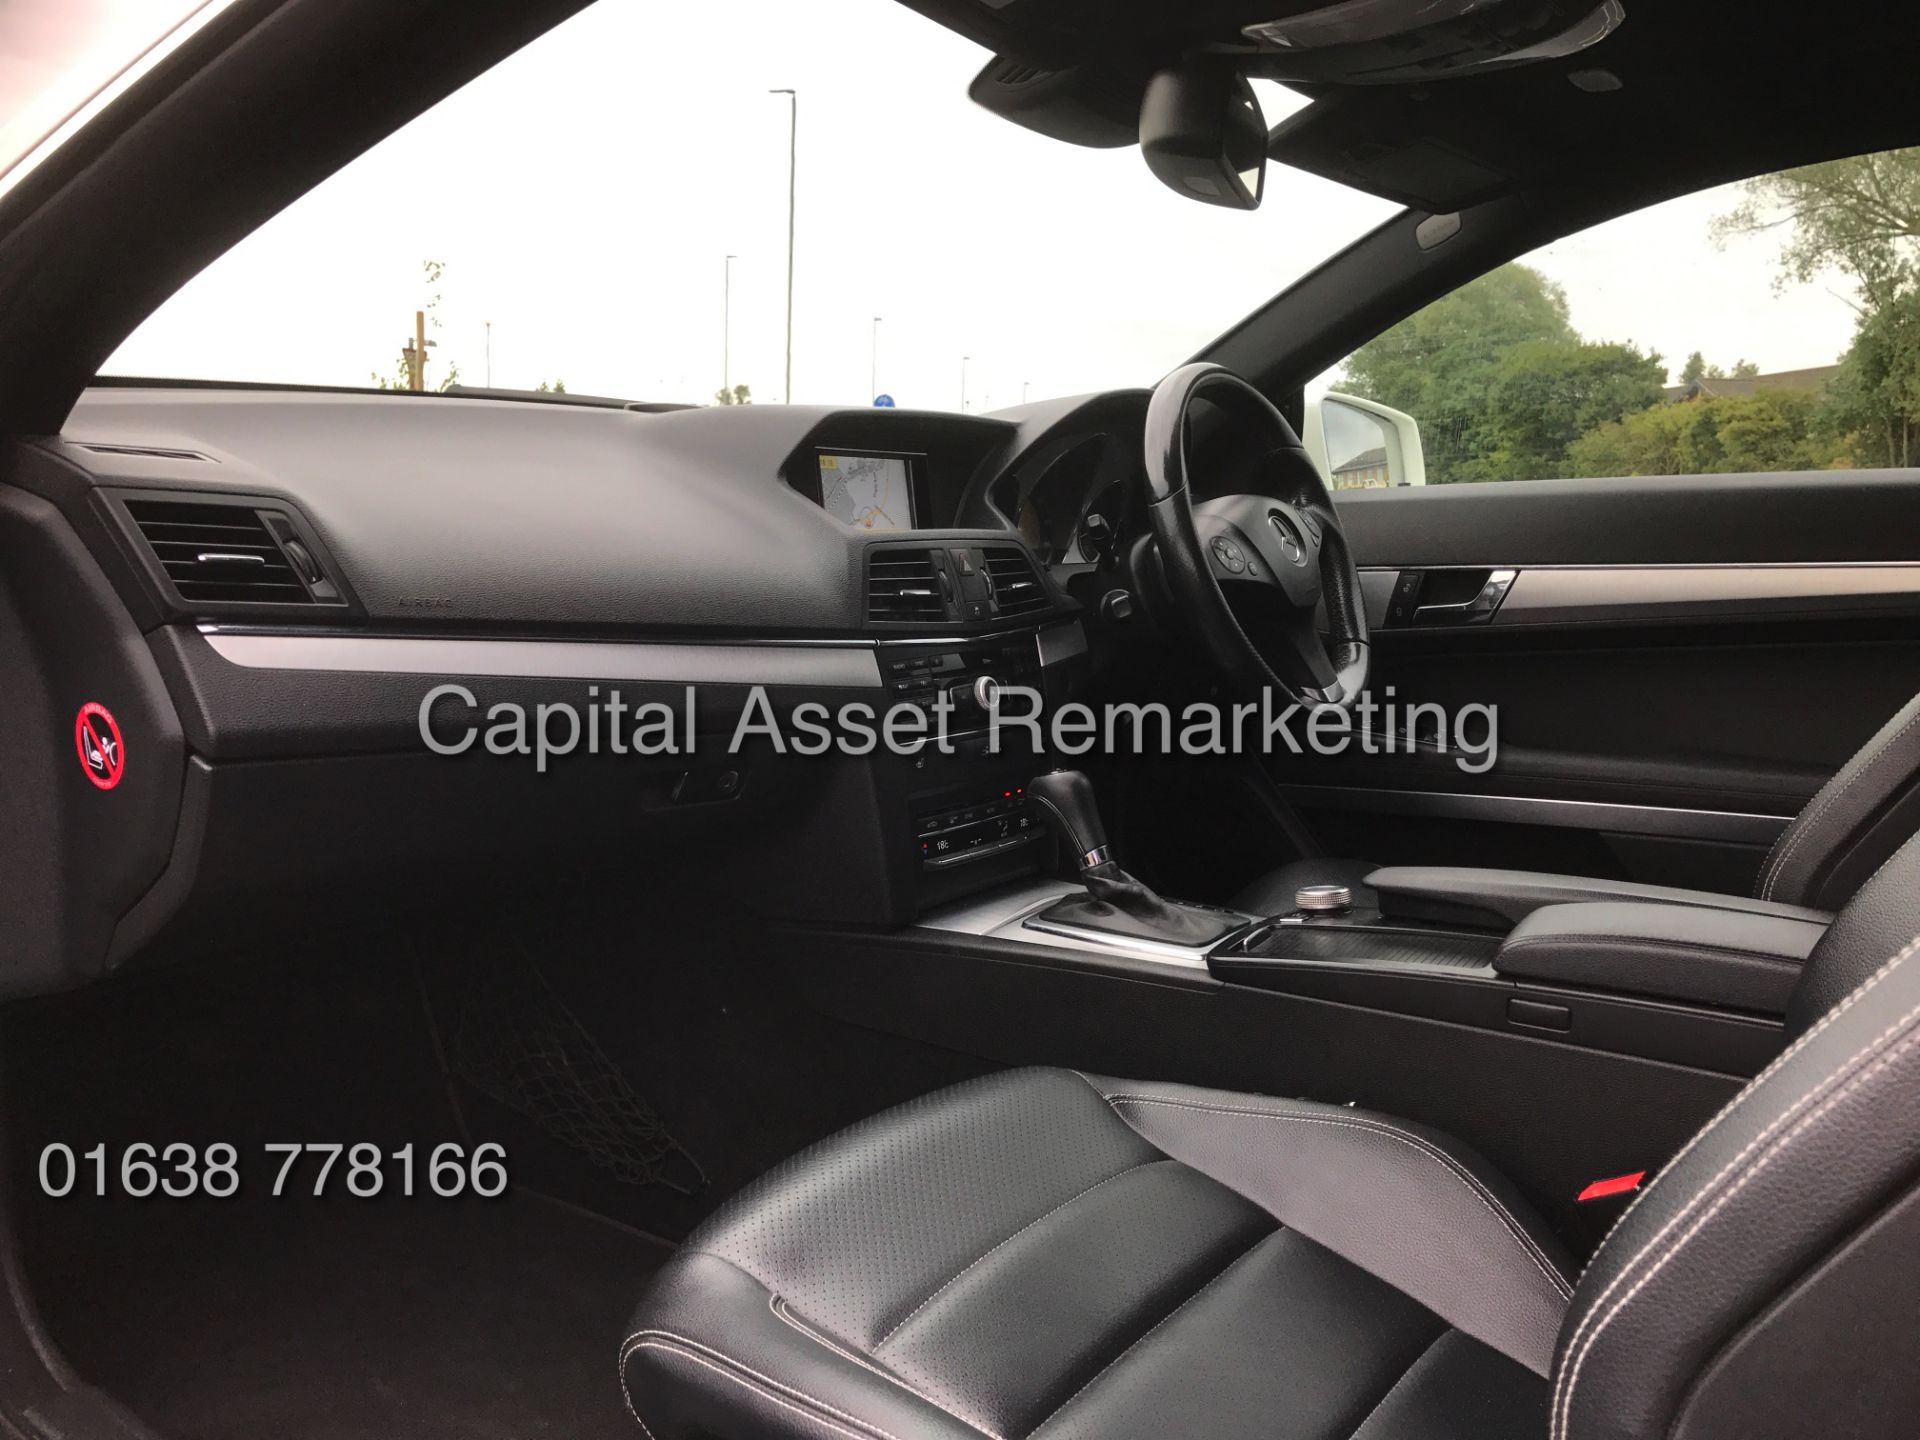 MERCEDES E350CDI 7G TRONIC "AMG SPORT" COUPE (10 REG) SAT NAV - LEATHER - AMG PACK - FULLY LOADED ! - Image 15 of 25